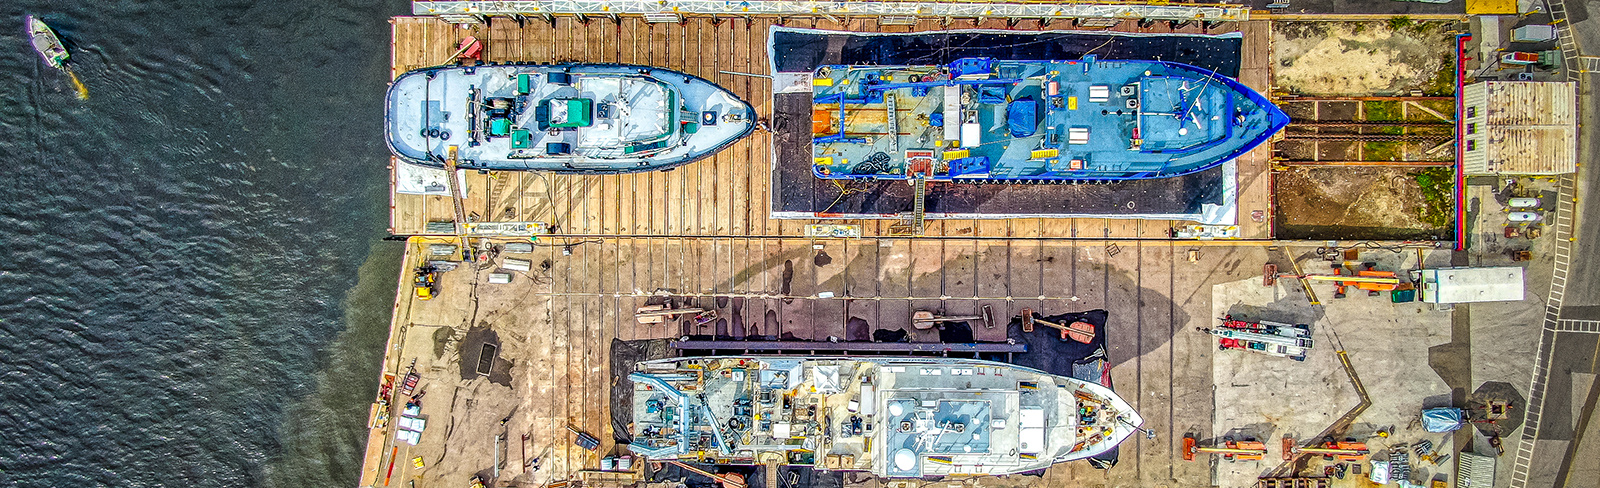 Ships viewed from above